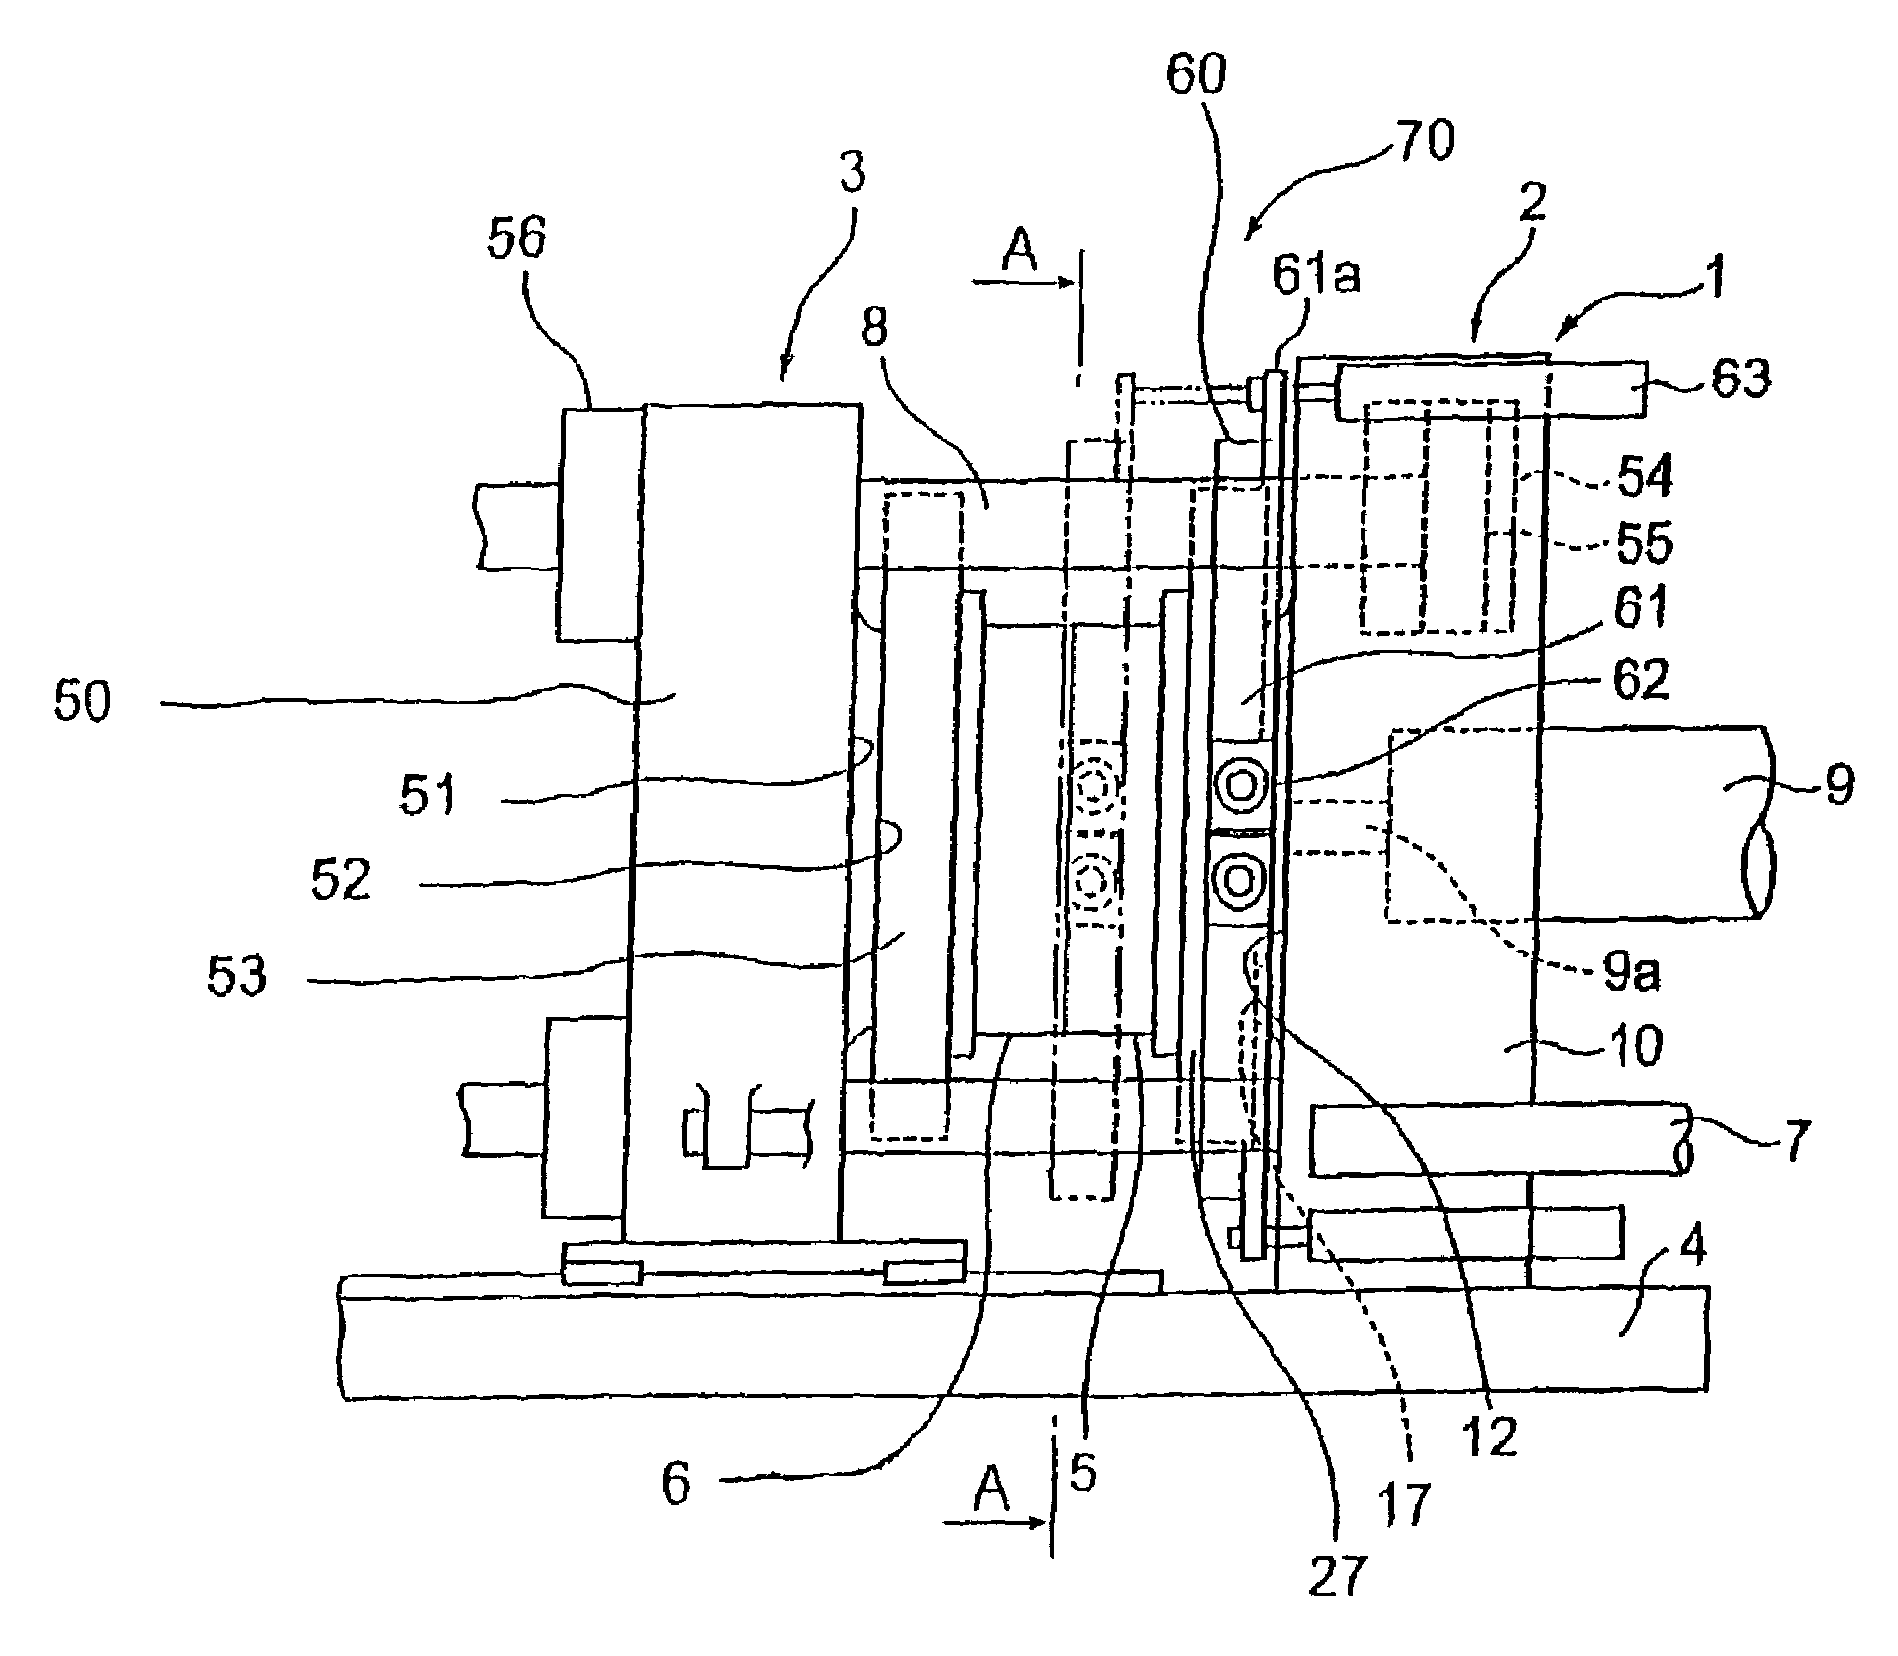 Mold clamping apparatus, injection molding machine and injection molding method